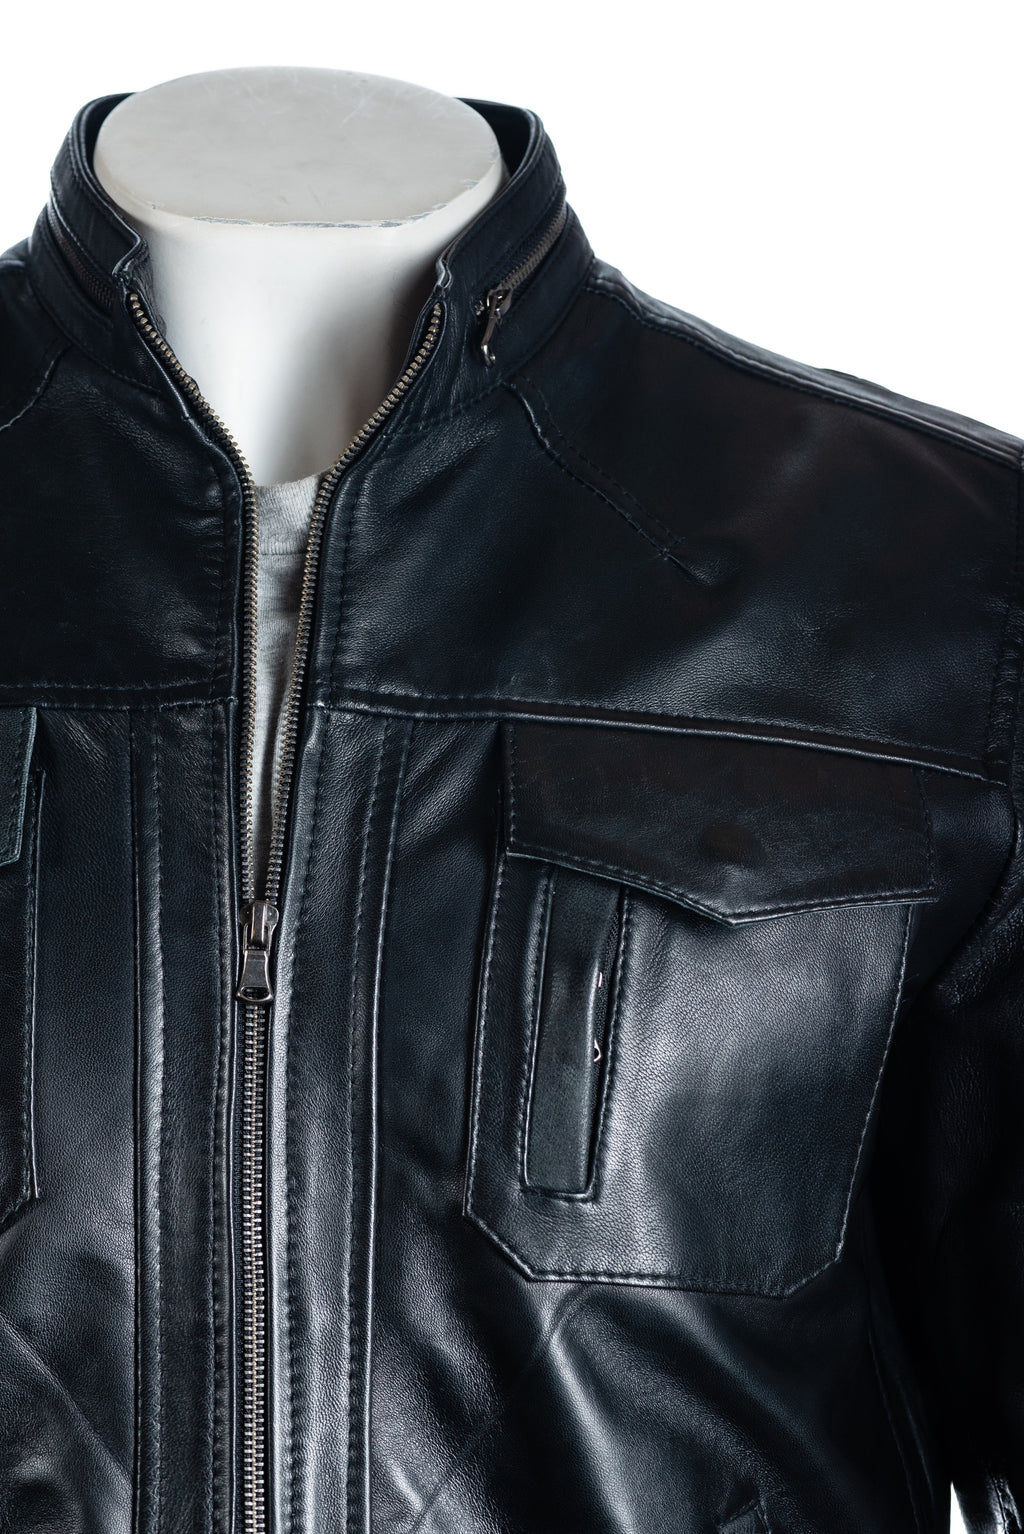 Men's Black Classic Pocketed Leather Jacket: Renato